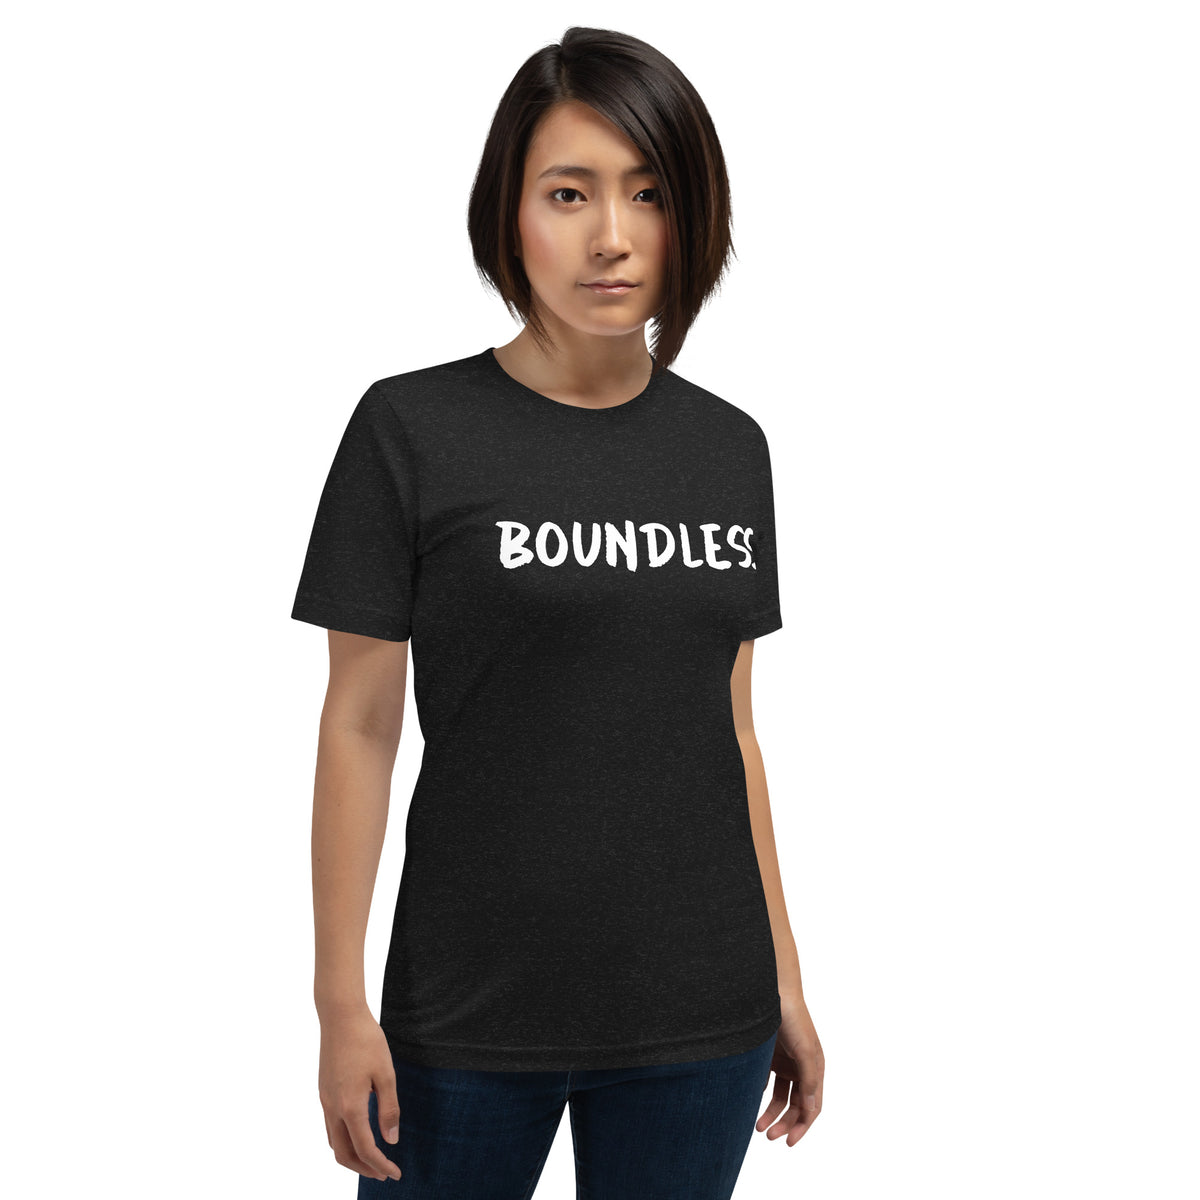 Boundless-Inspired T-shirt | Faith Apparel | One-Word Unisex T-shirt